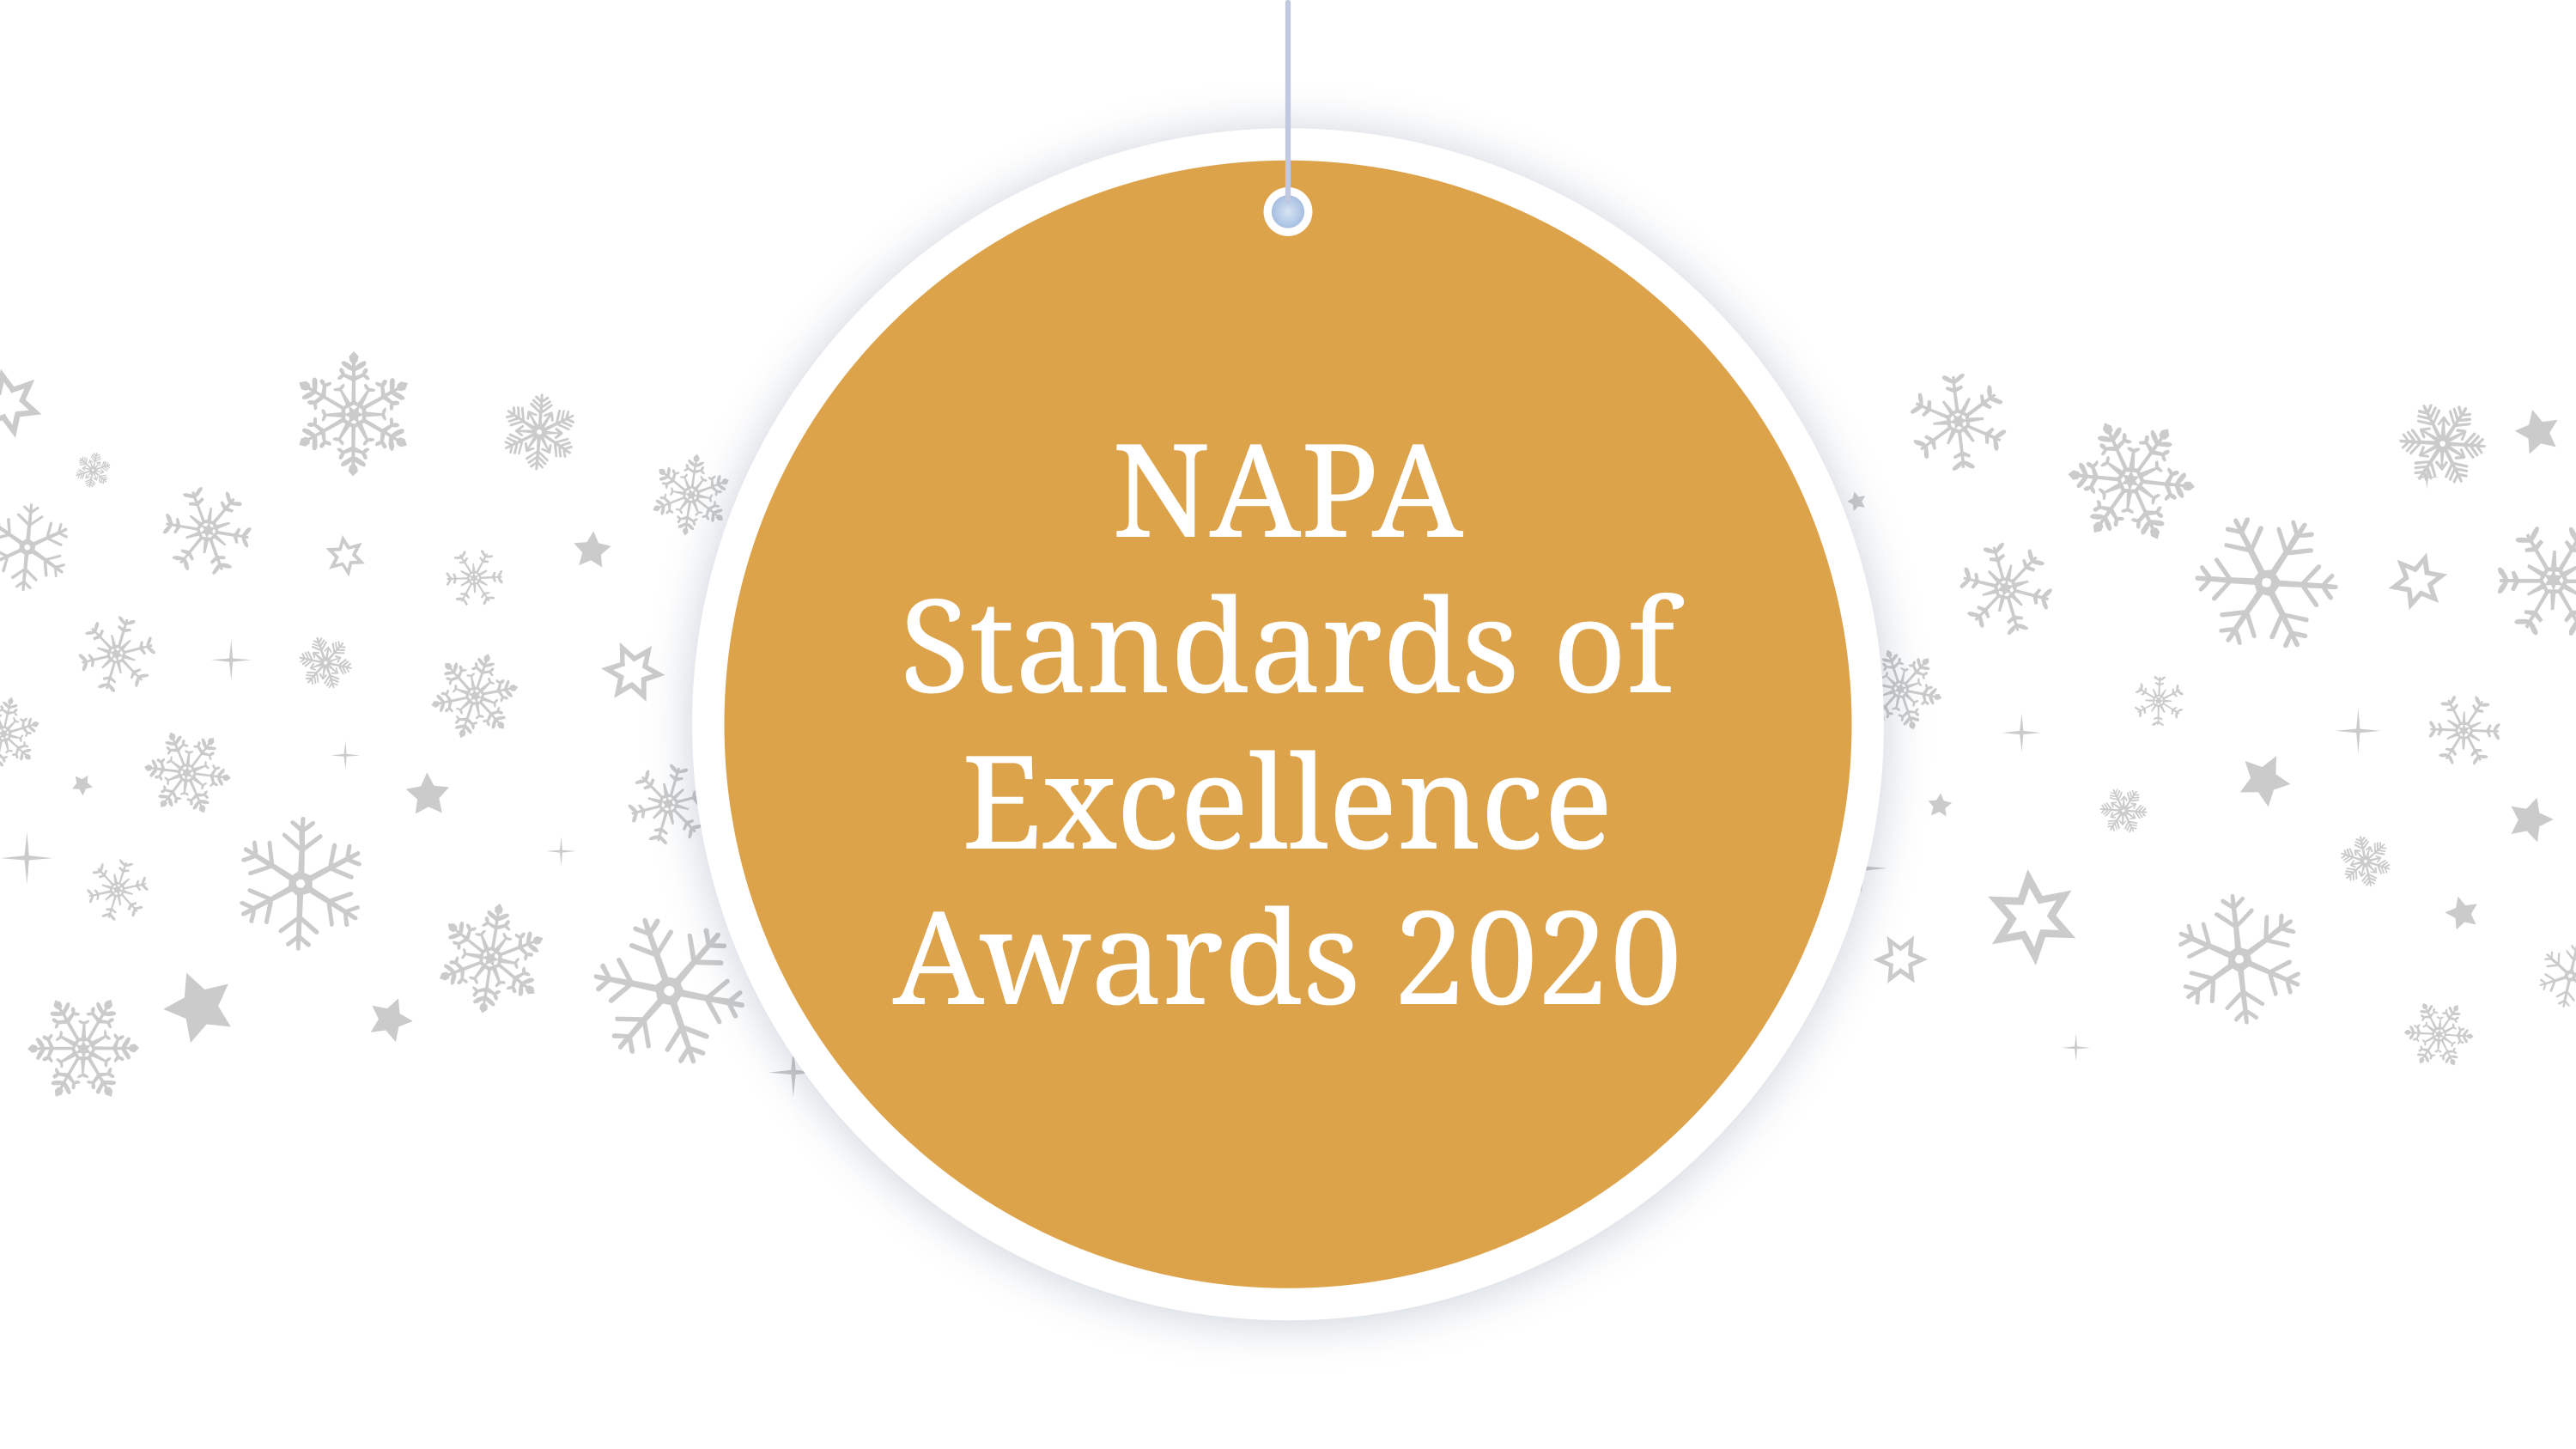 NAPA Standards of Excellence Awards 2020